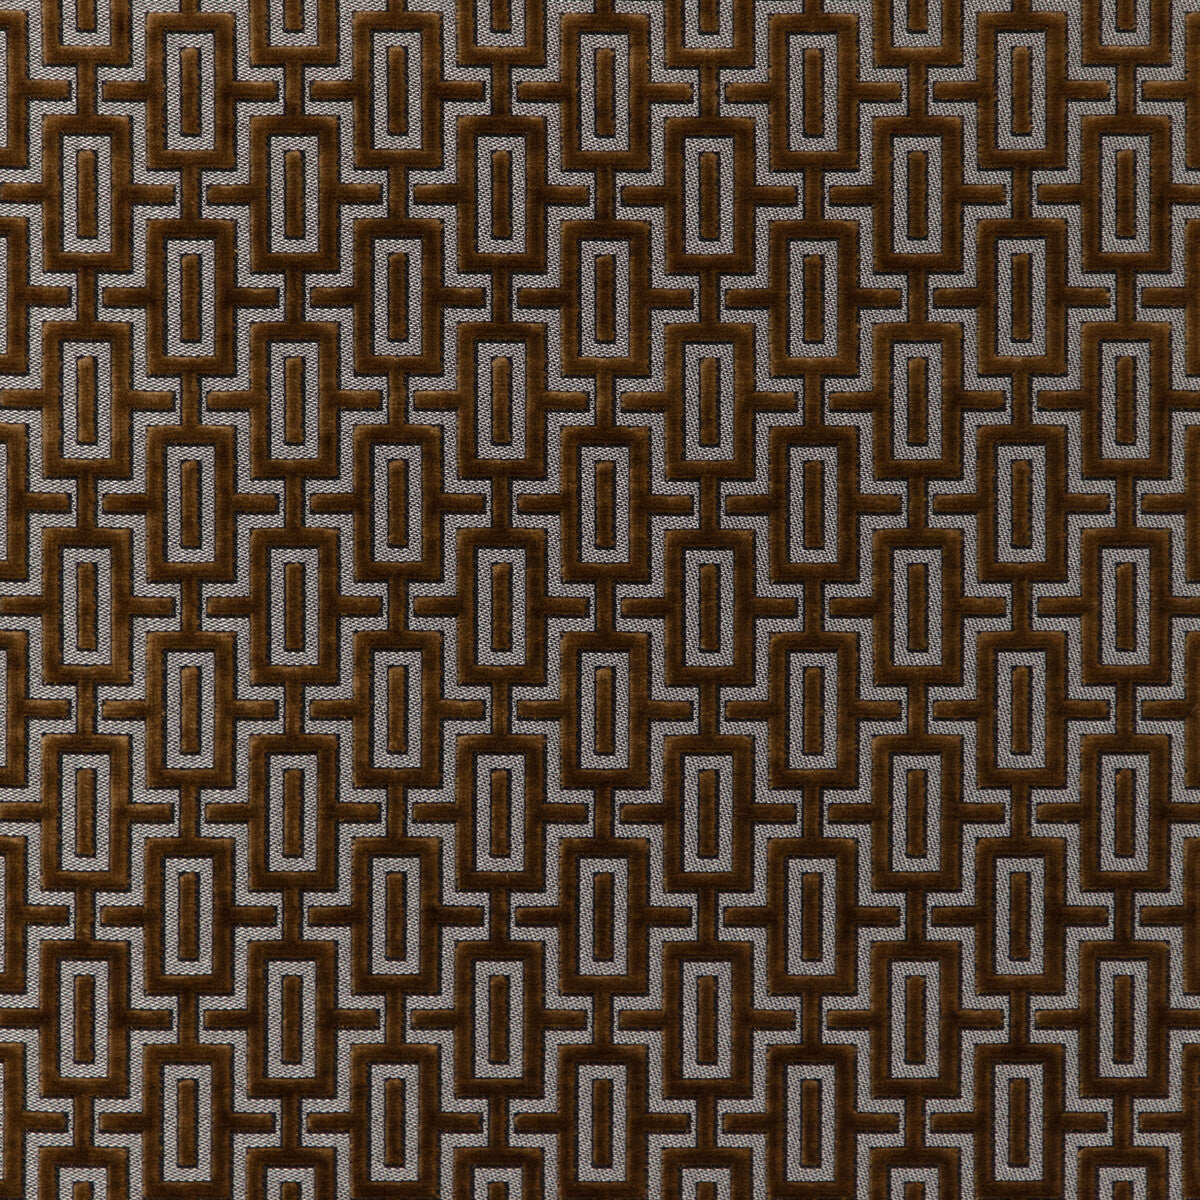 Joyride fabric in whiskey color - pattern 37286.66.0 - by Kravet Contract in the Happy Hour collection